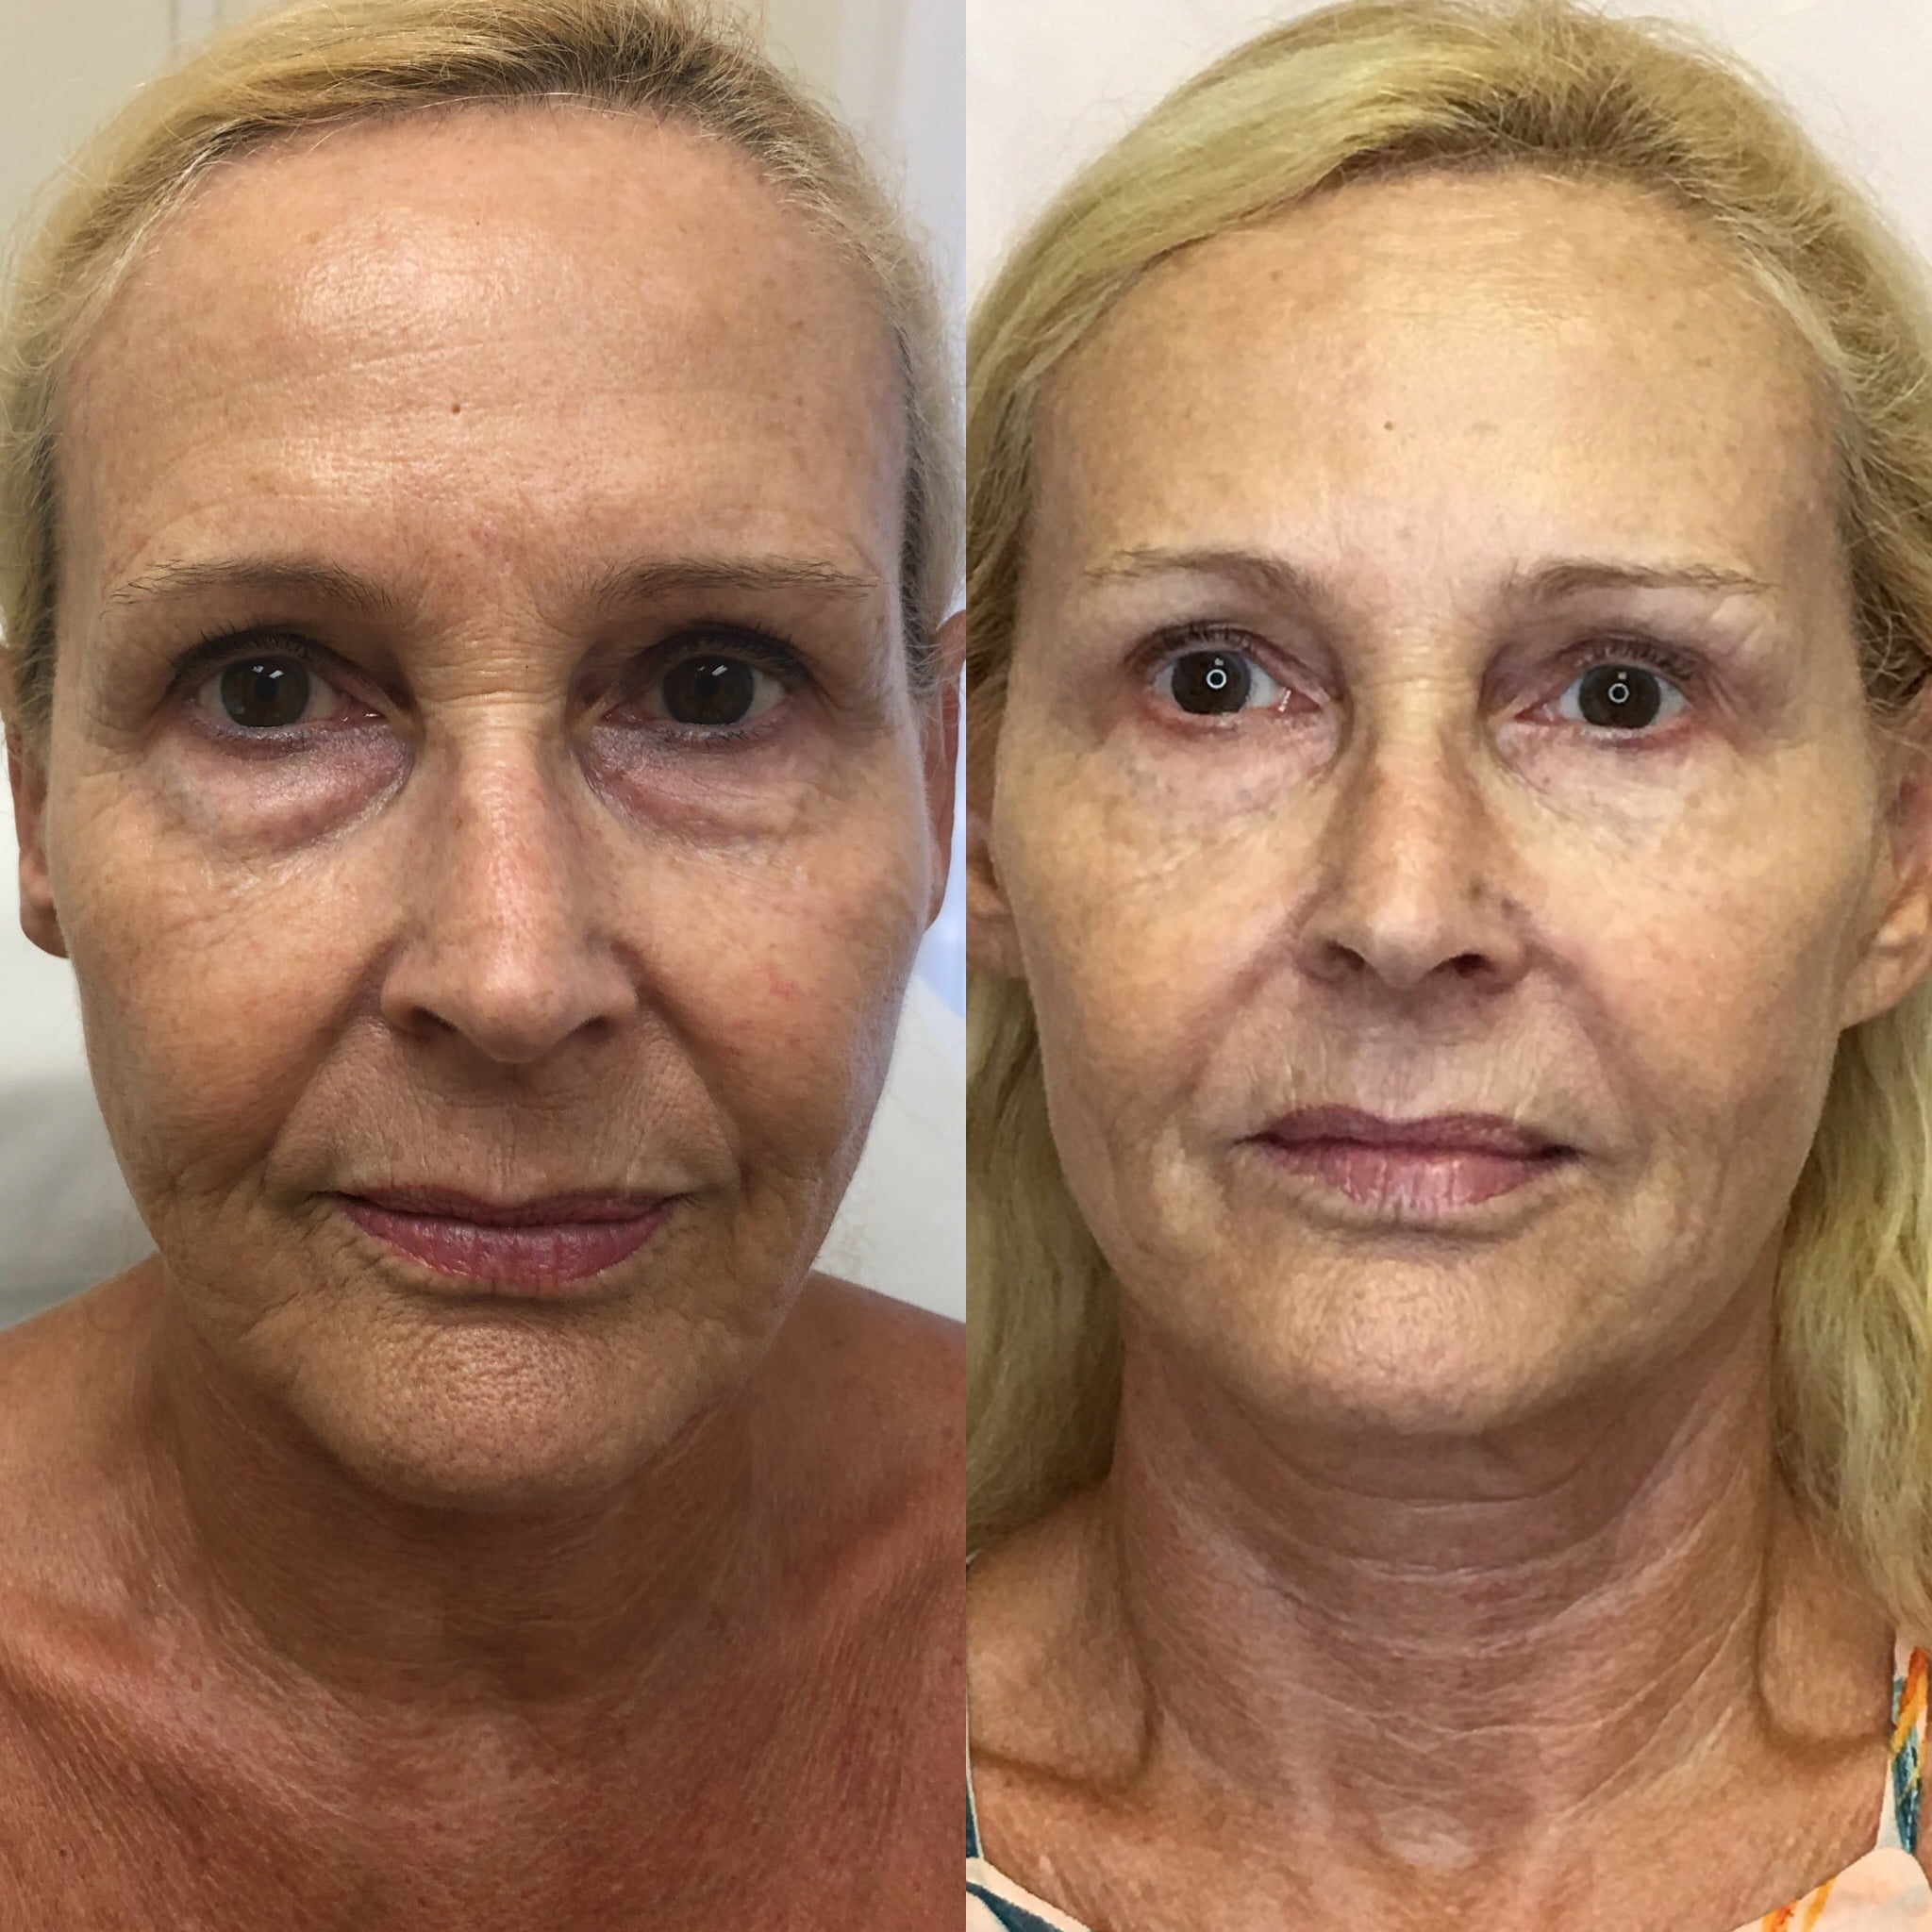 Before and After Fillers Panfacial treatment | Beauty Boost Med Spa at Newport Beach, CA